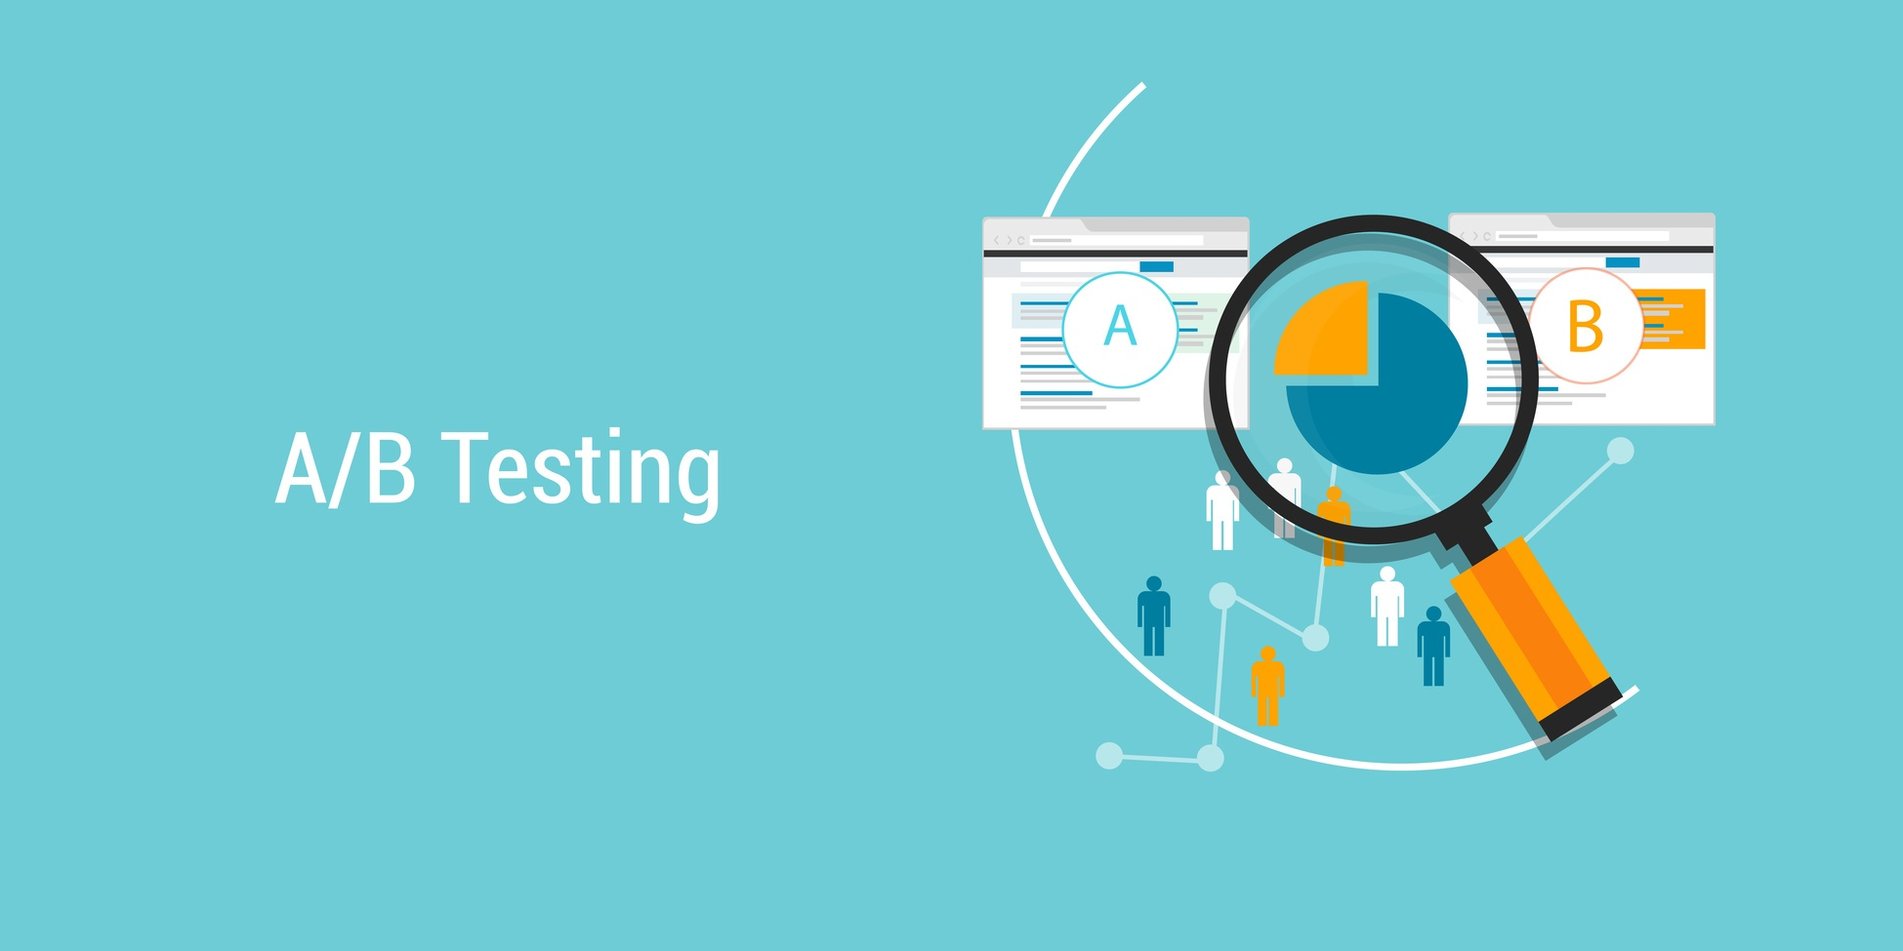 Use A/B Testing to Optimize These 5 Landing Page Elements